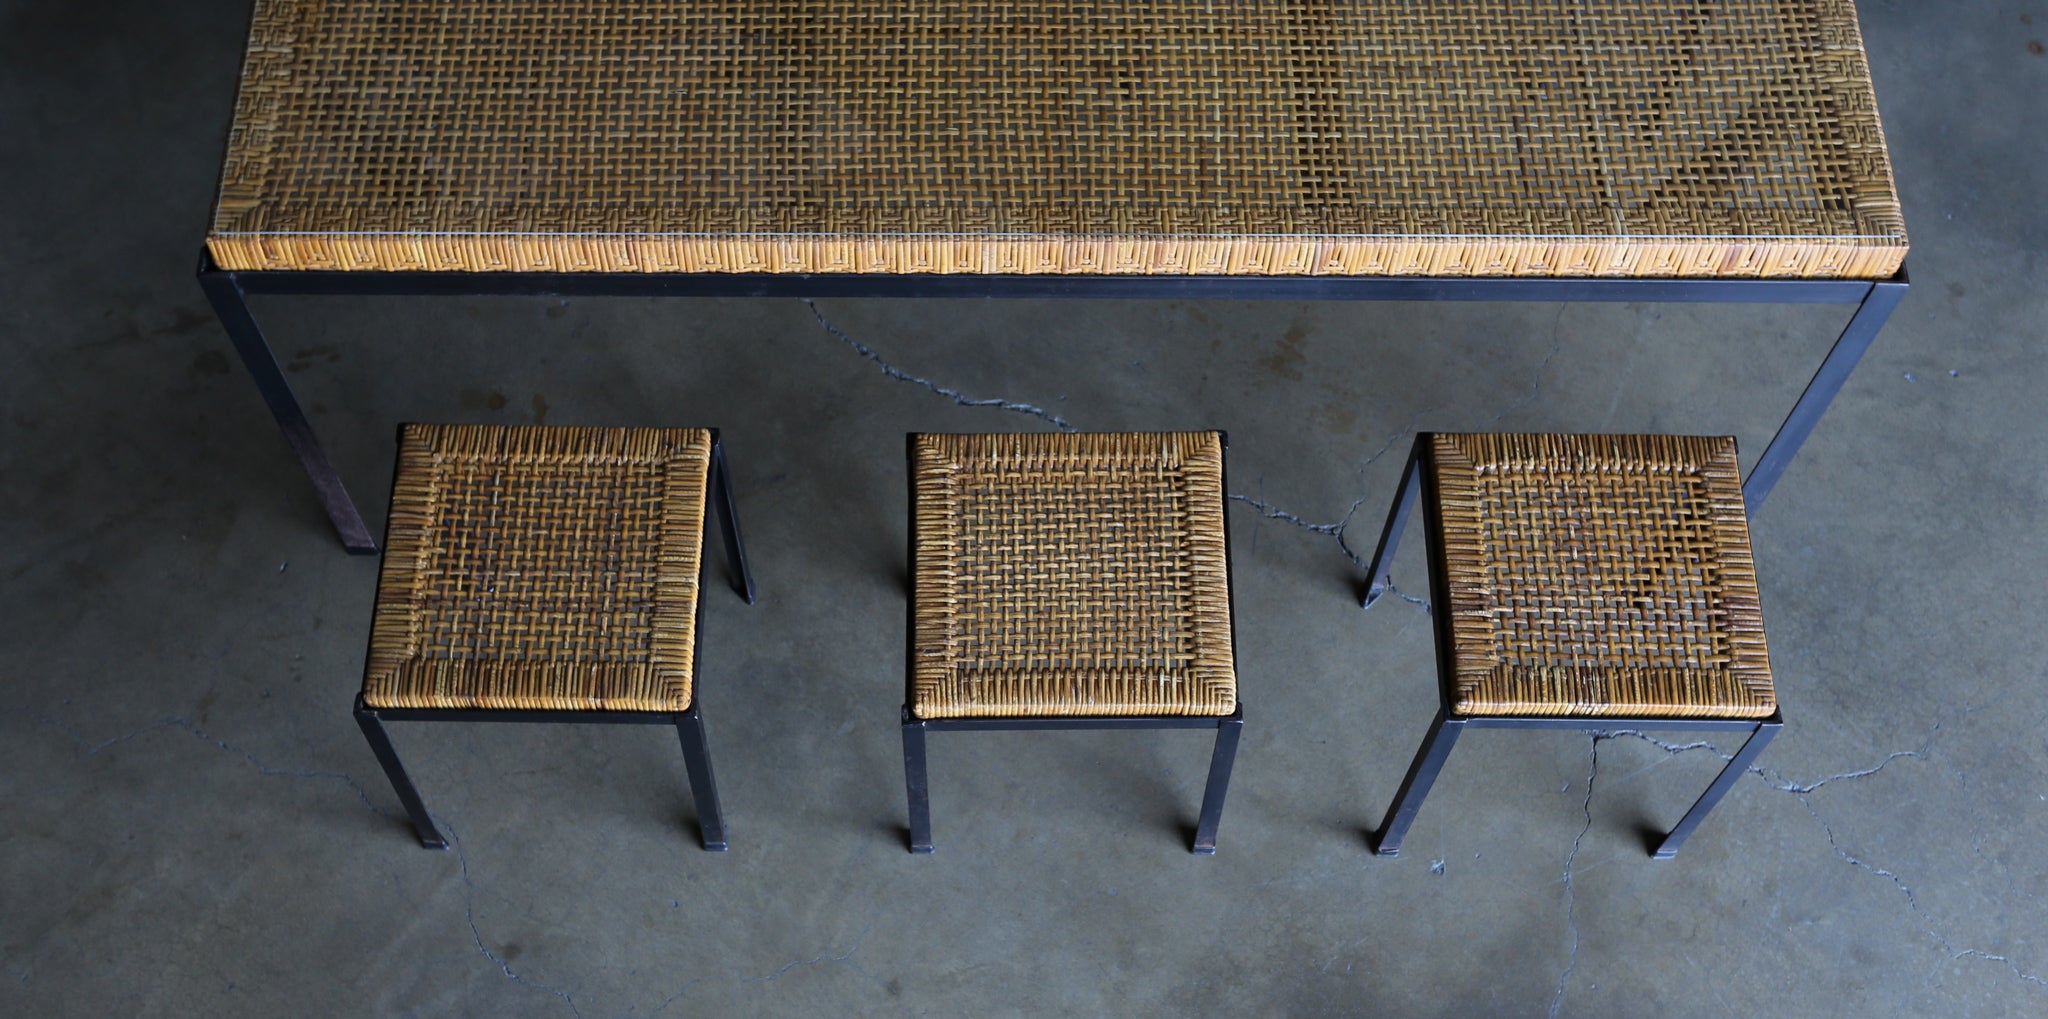 = SOLD = Danny Ho Fong Iron & Cane Set of Six Stools w/ Dining Table for Tropi-Cal 1960's